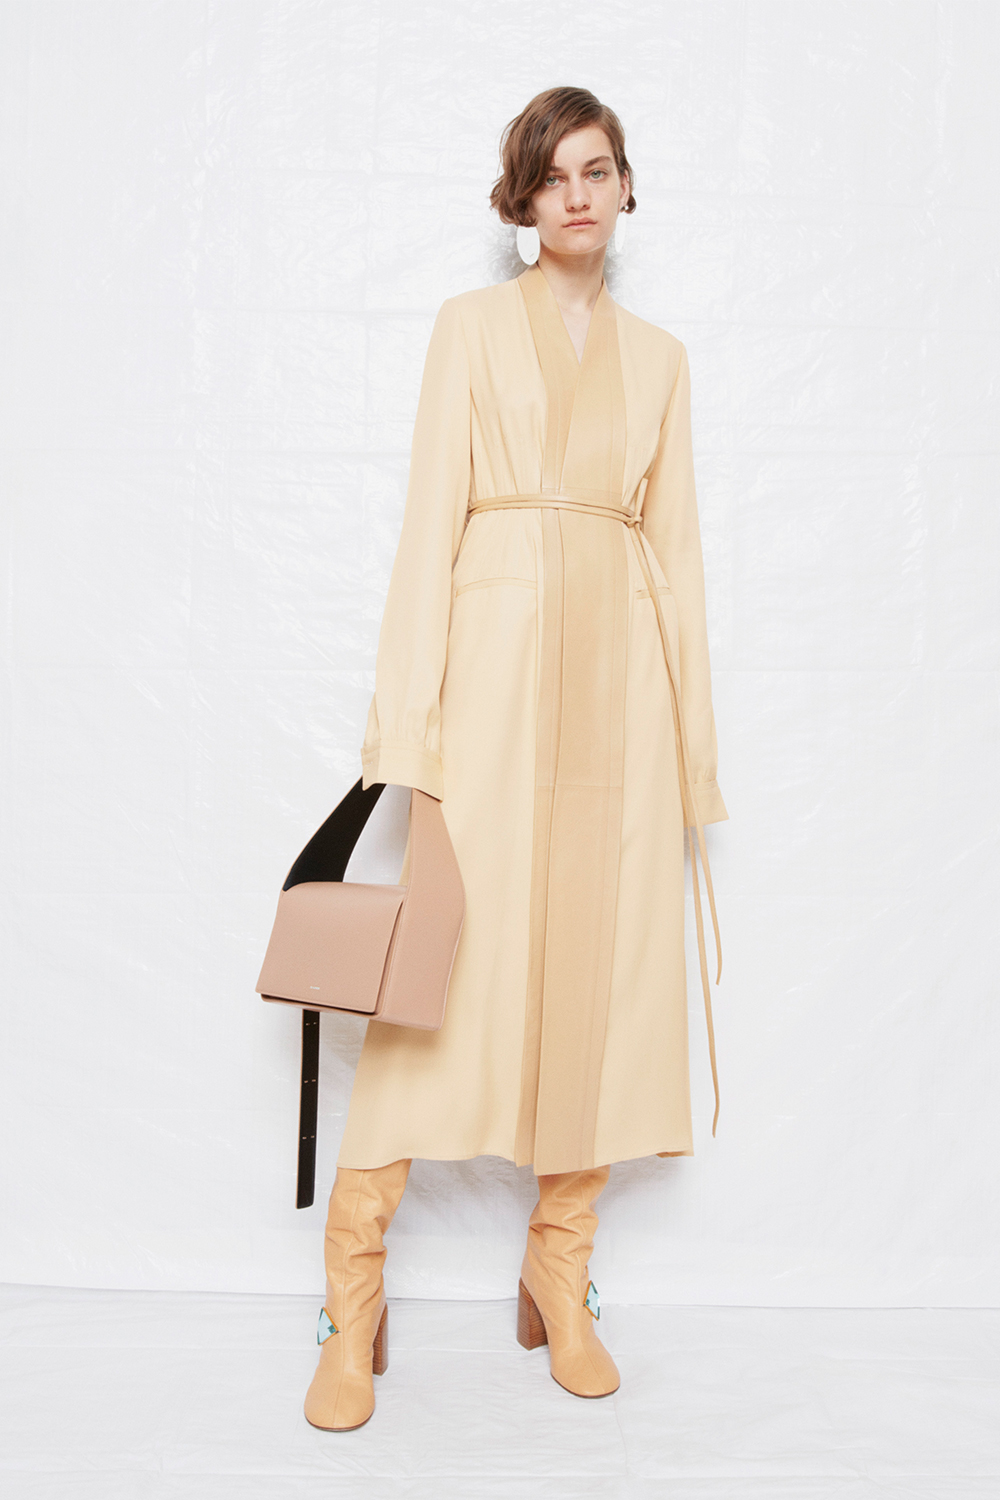 Minimalist Fashion: Your 16-Piece Pared-Back Capsule | Who What Wear UK